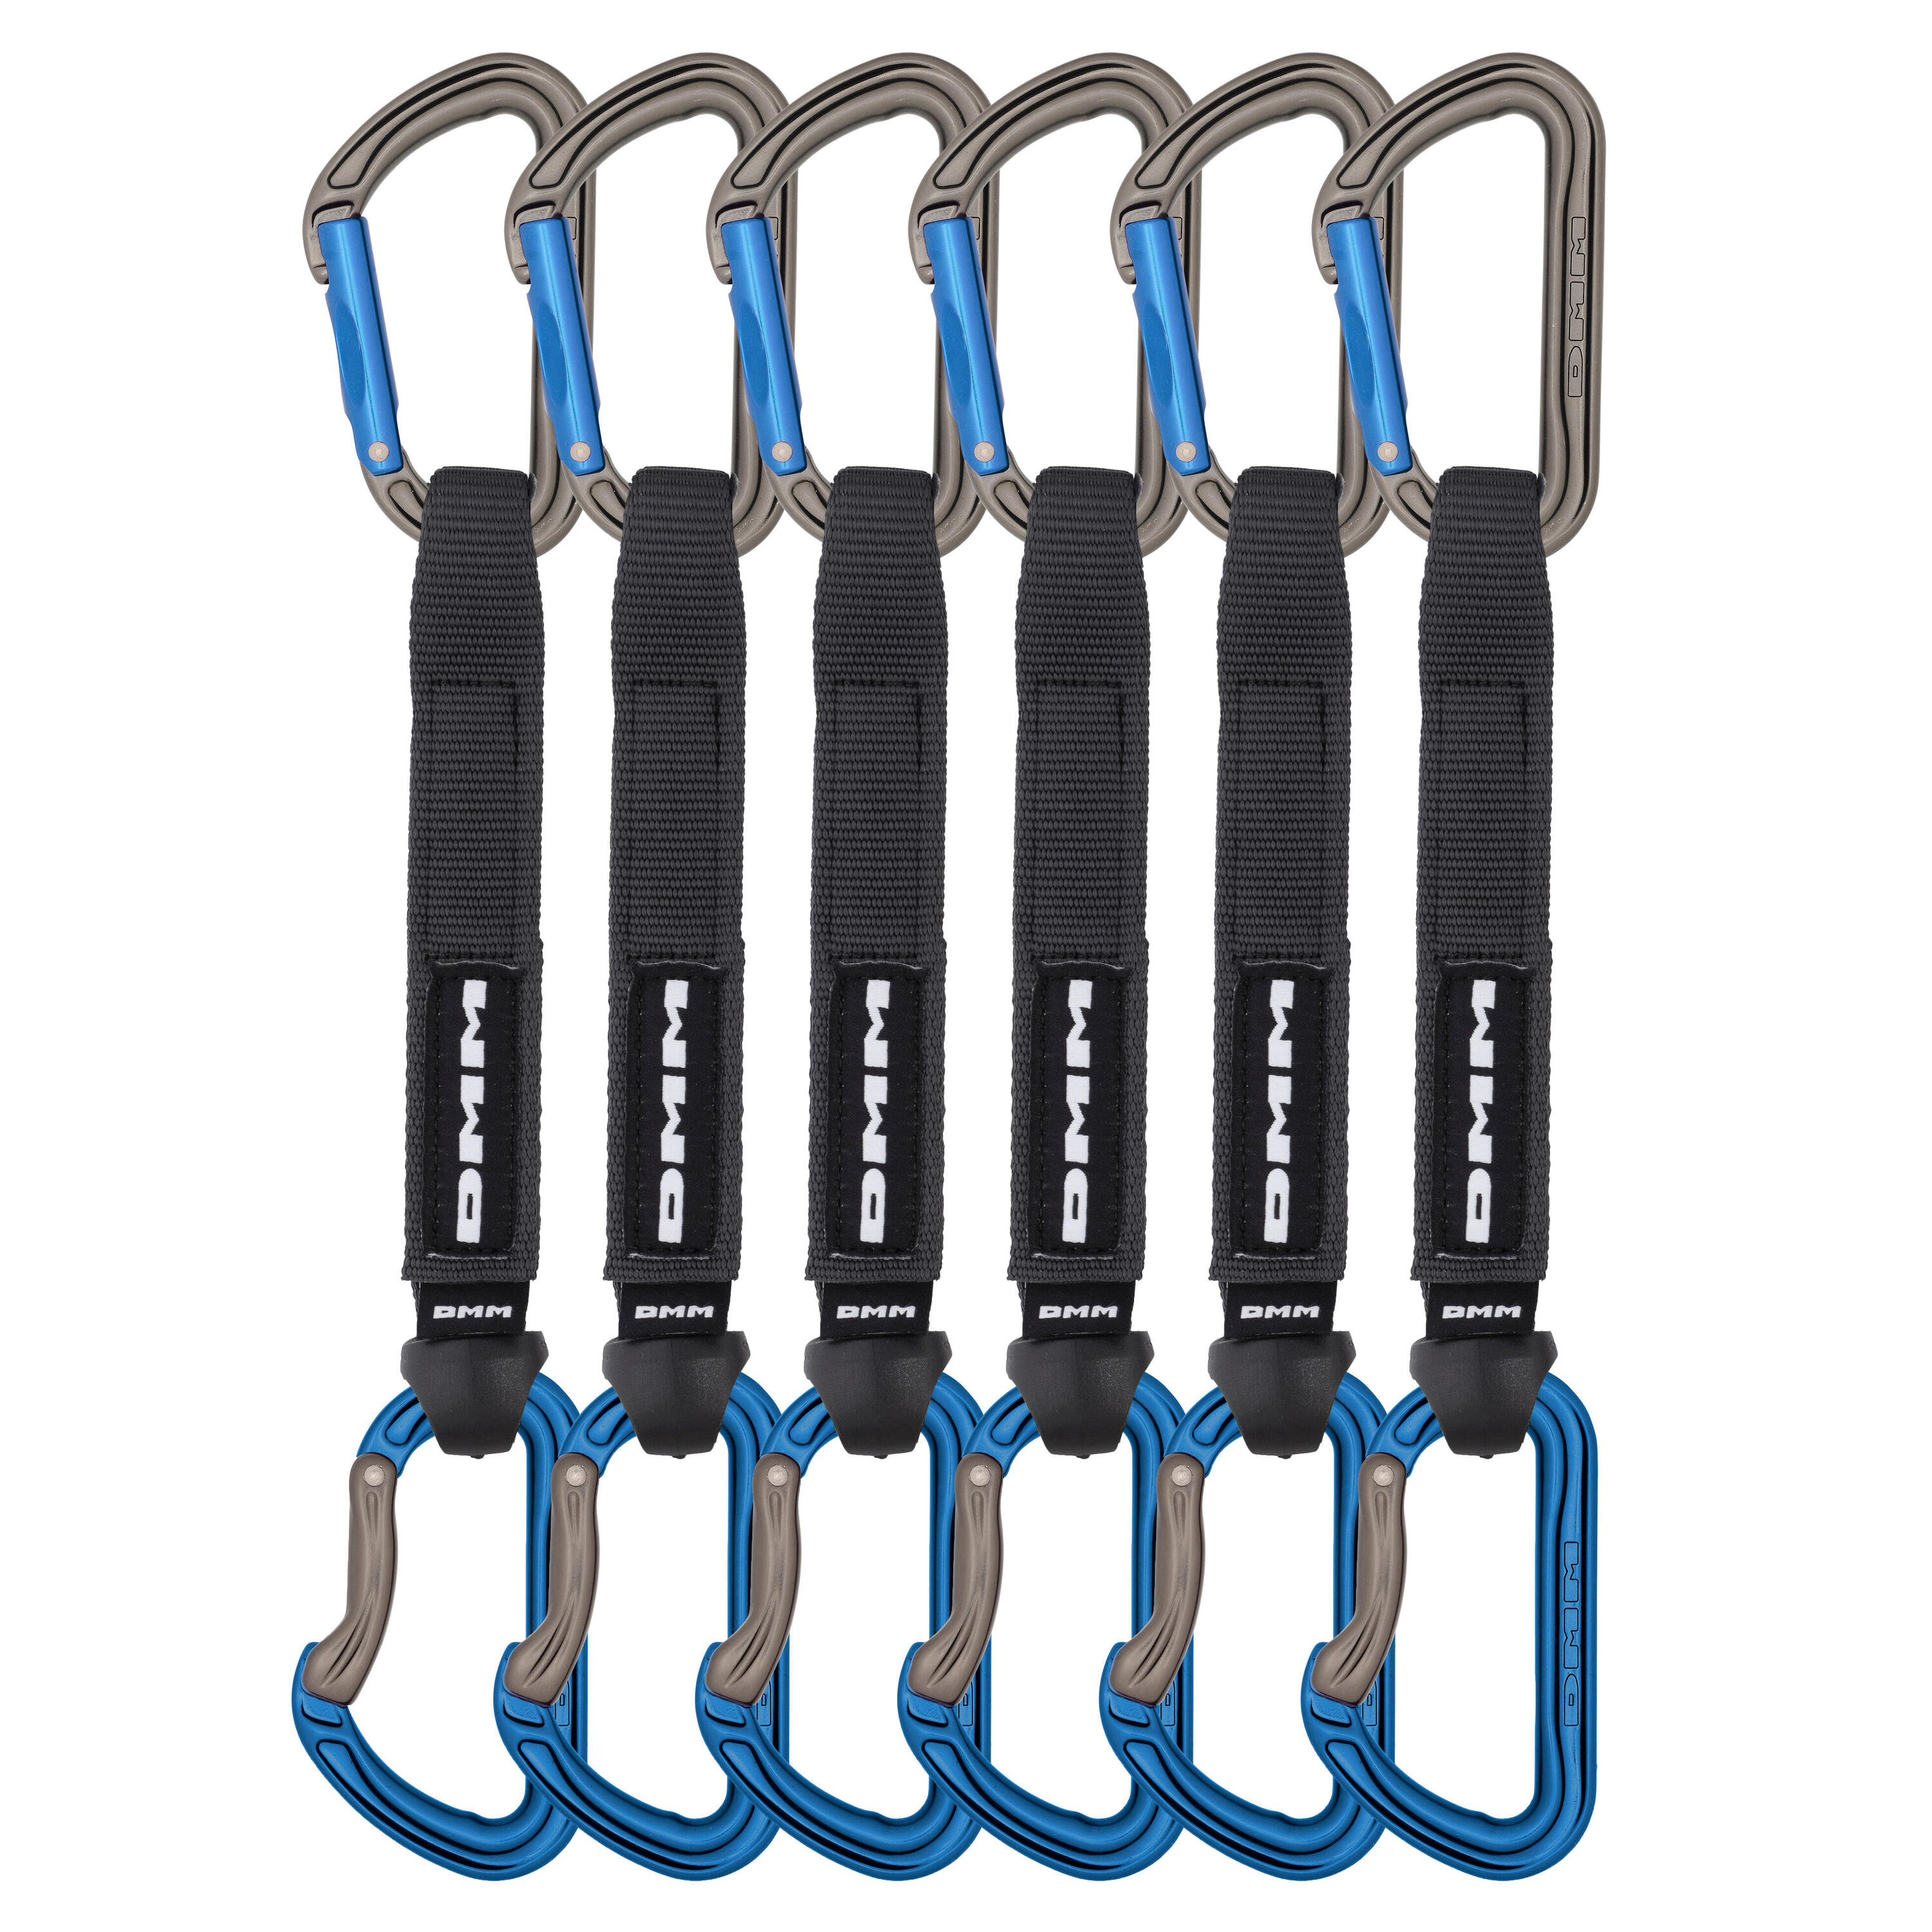 Shadow Quickdraw 18cm - Blue - 6 Pack 1/2